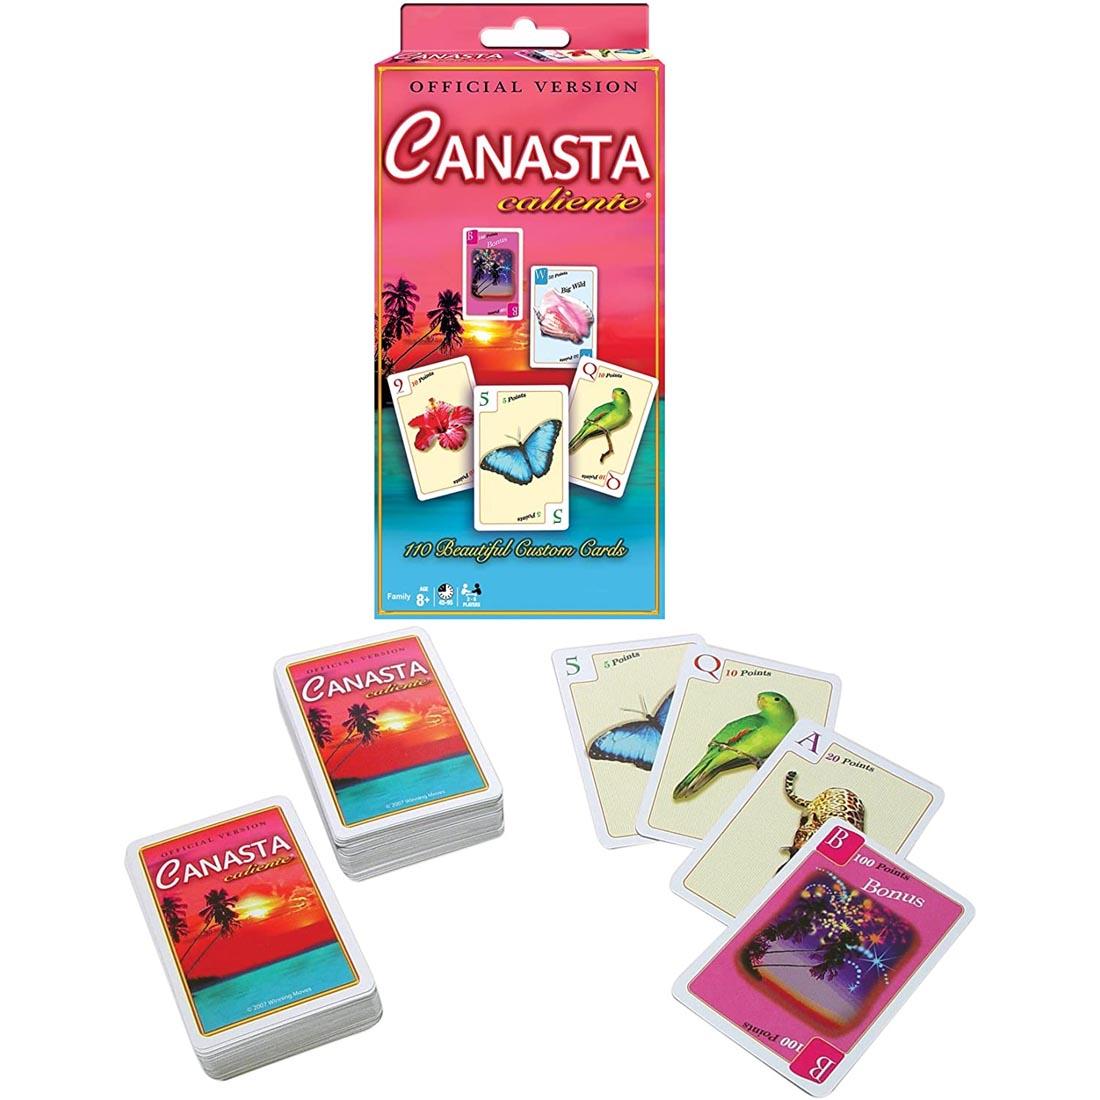 box and contents of Canasta Caliente Card Game